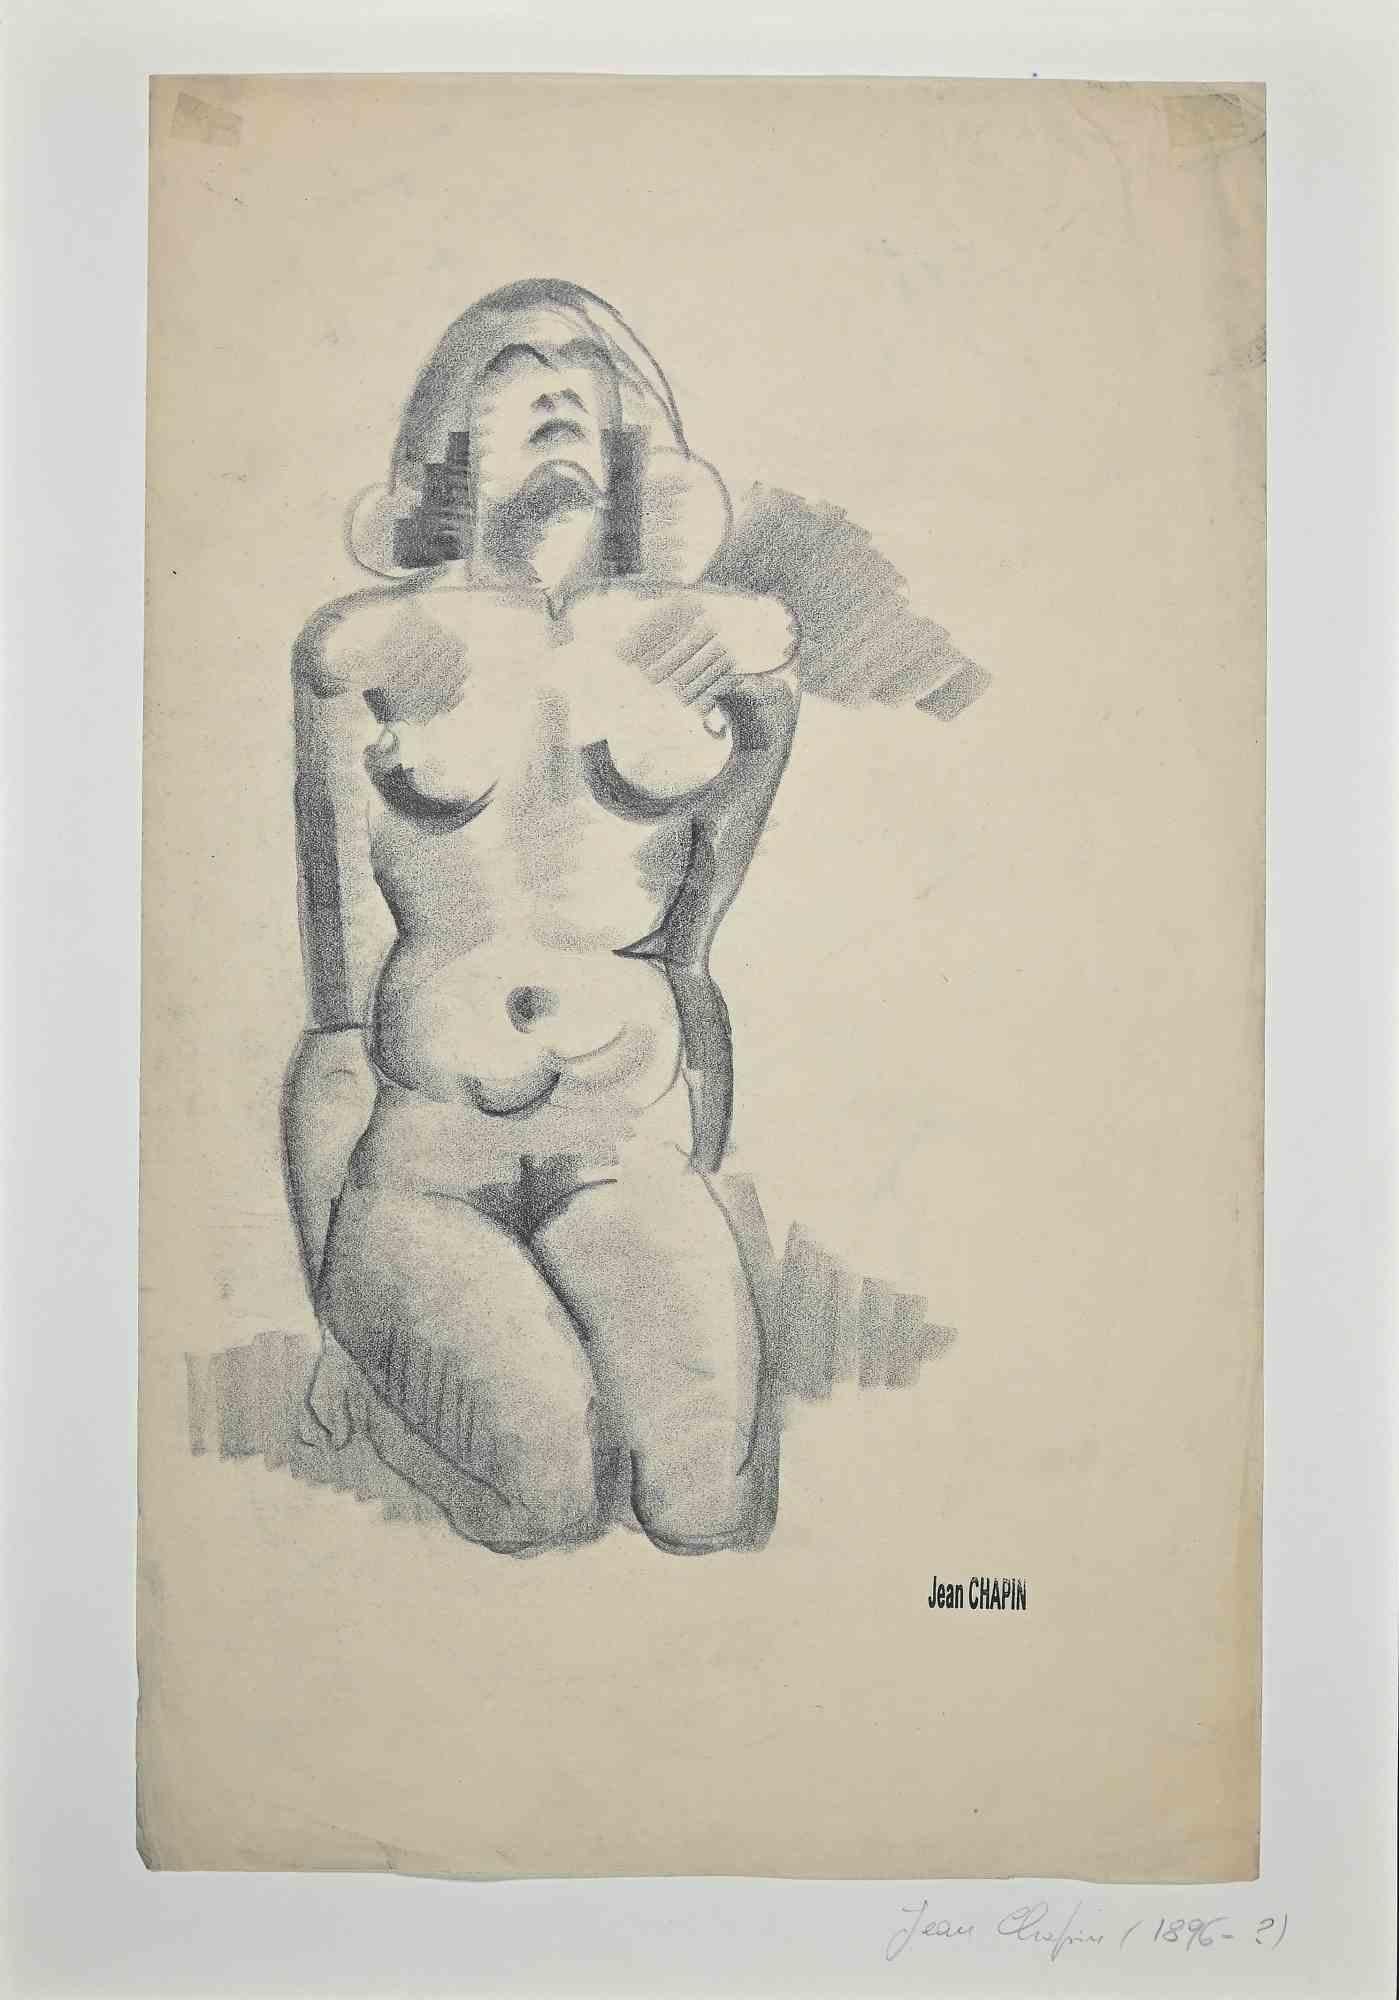 Nude of Woman is an original pencil drawing realized by Jean Chapin in 1930s.

Signature stamp on the yellowed paper, and pencil signature on the cardboard.

Good condition, except for some brown spots on the back.

Jean Chapin is a French painter